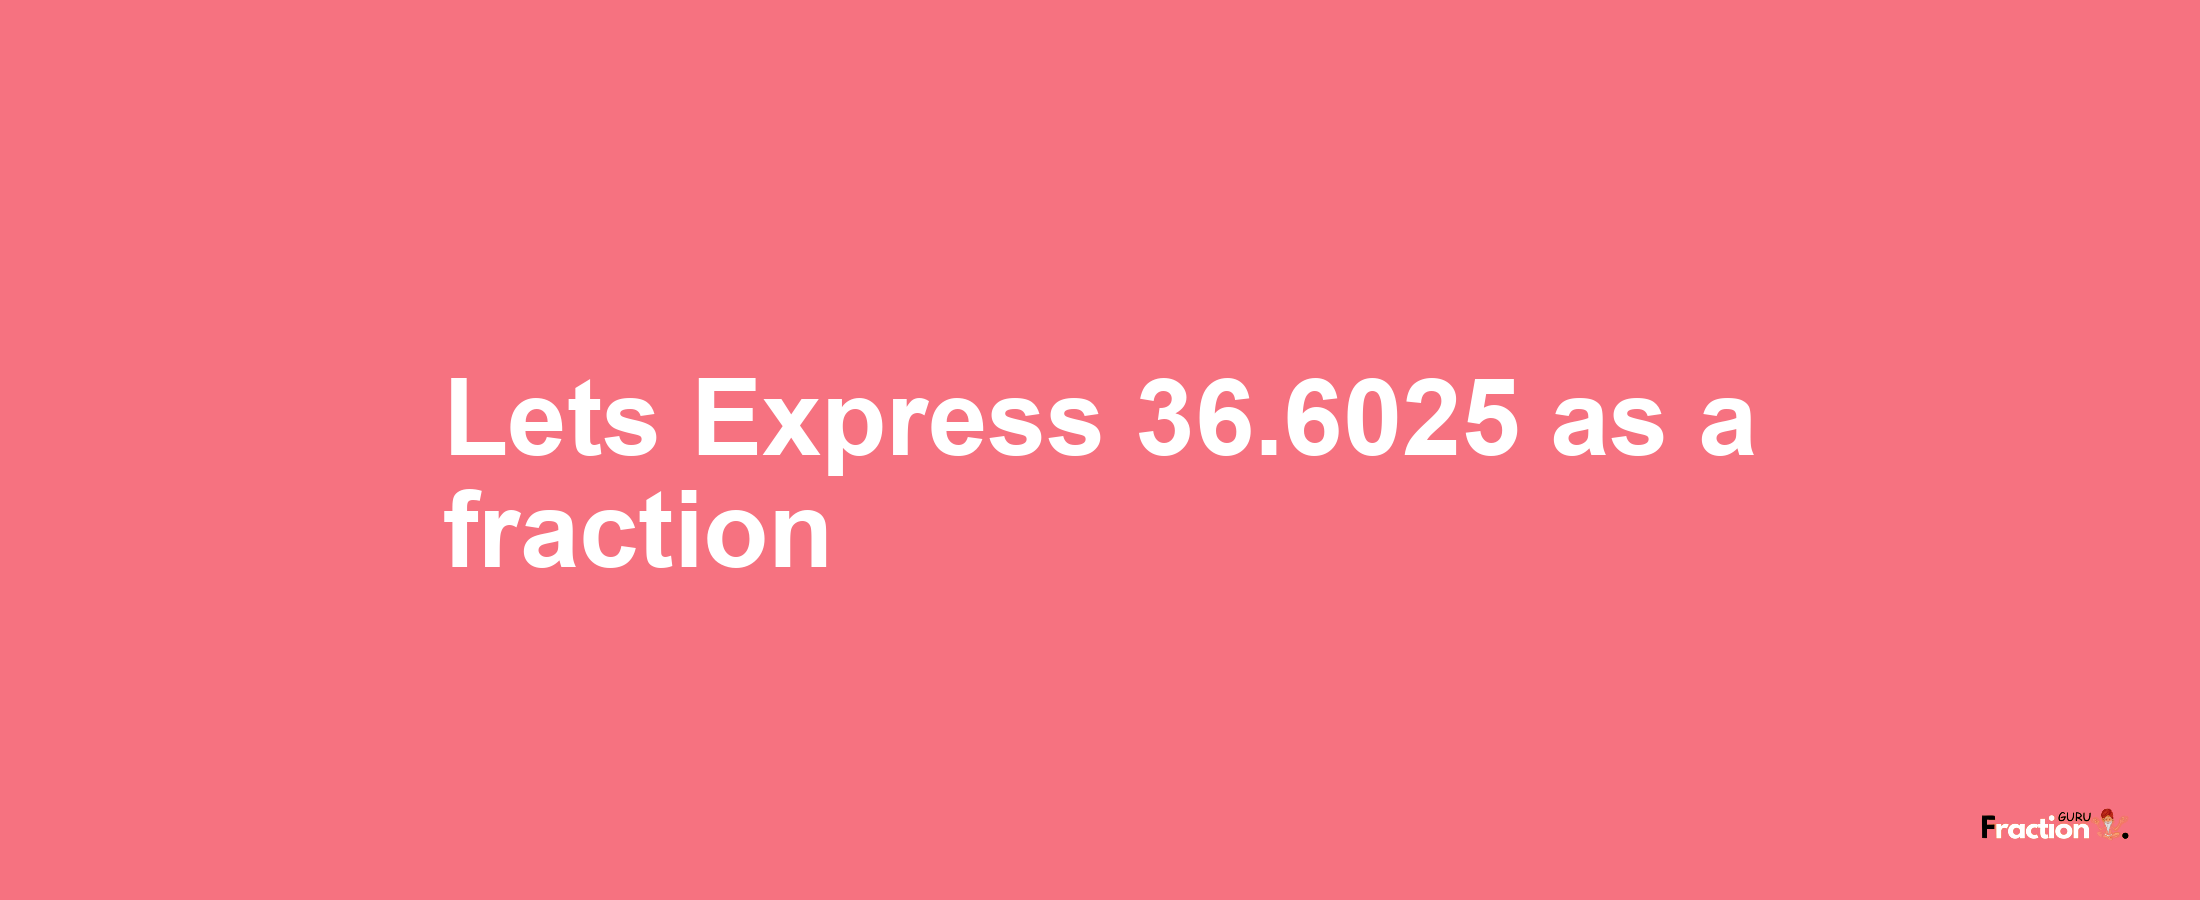 Lets Express 36.6025 as afraction